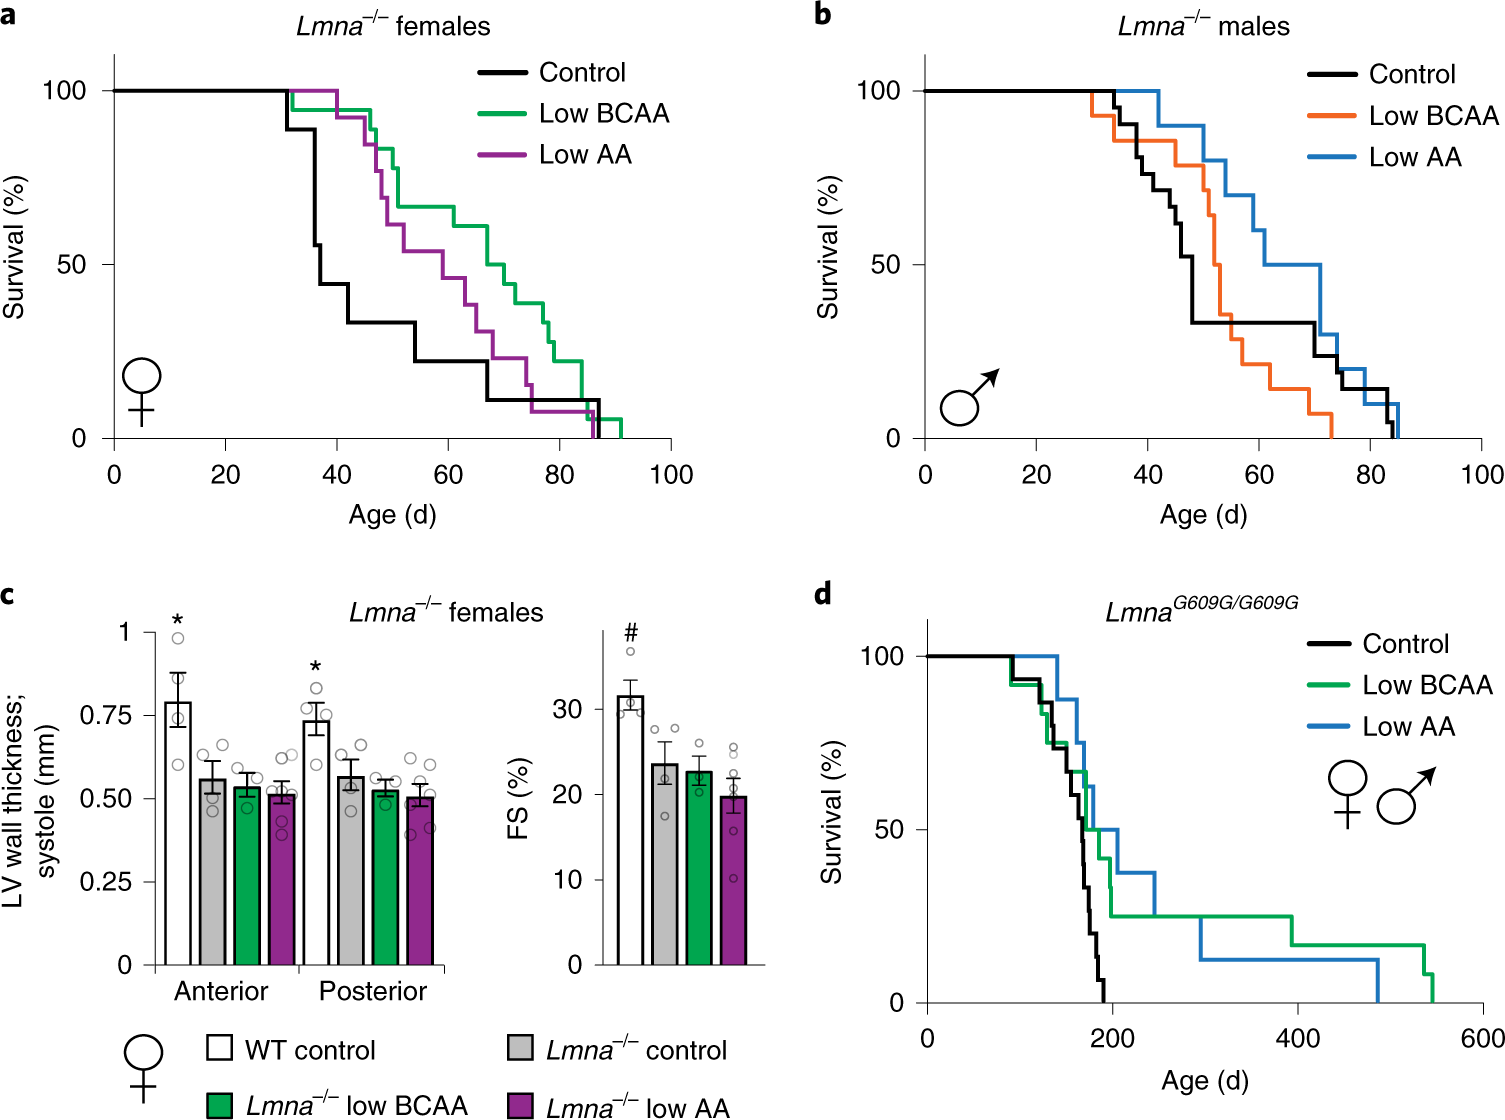 Lifelong restriction of dietary branched-chain amino acids has sex-specific  benefits for frailty and life span in mice | Nature Aging